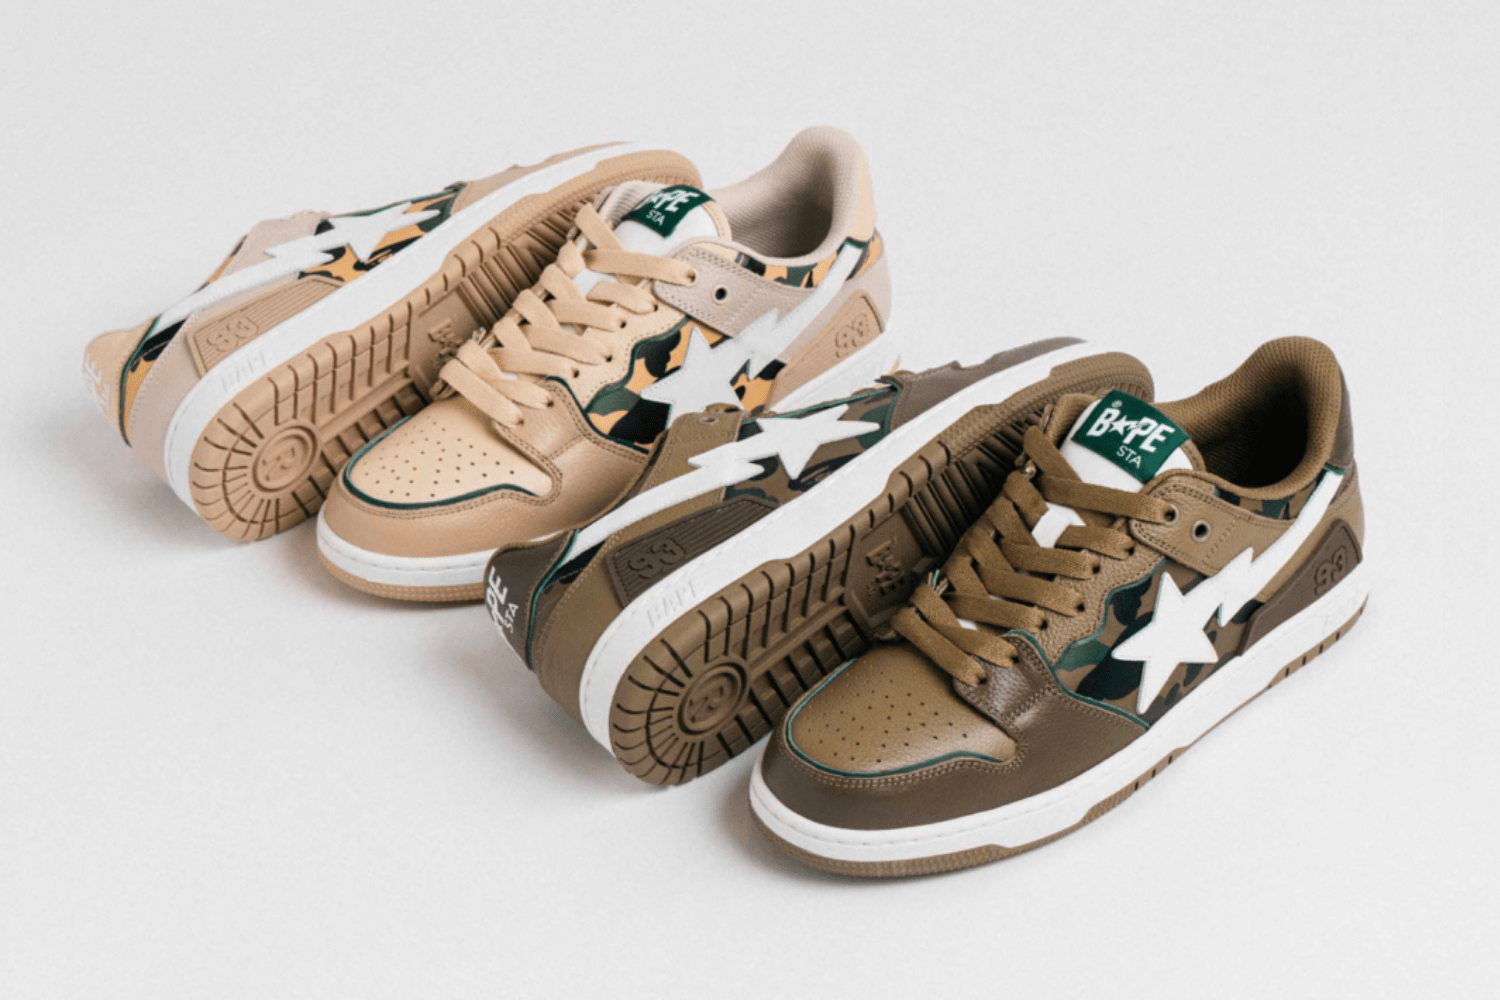 Exclusive discounts on A Bathing Ape at solebox